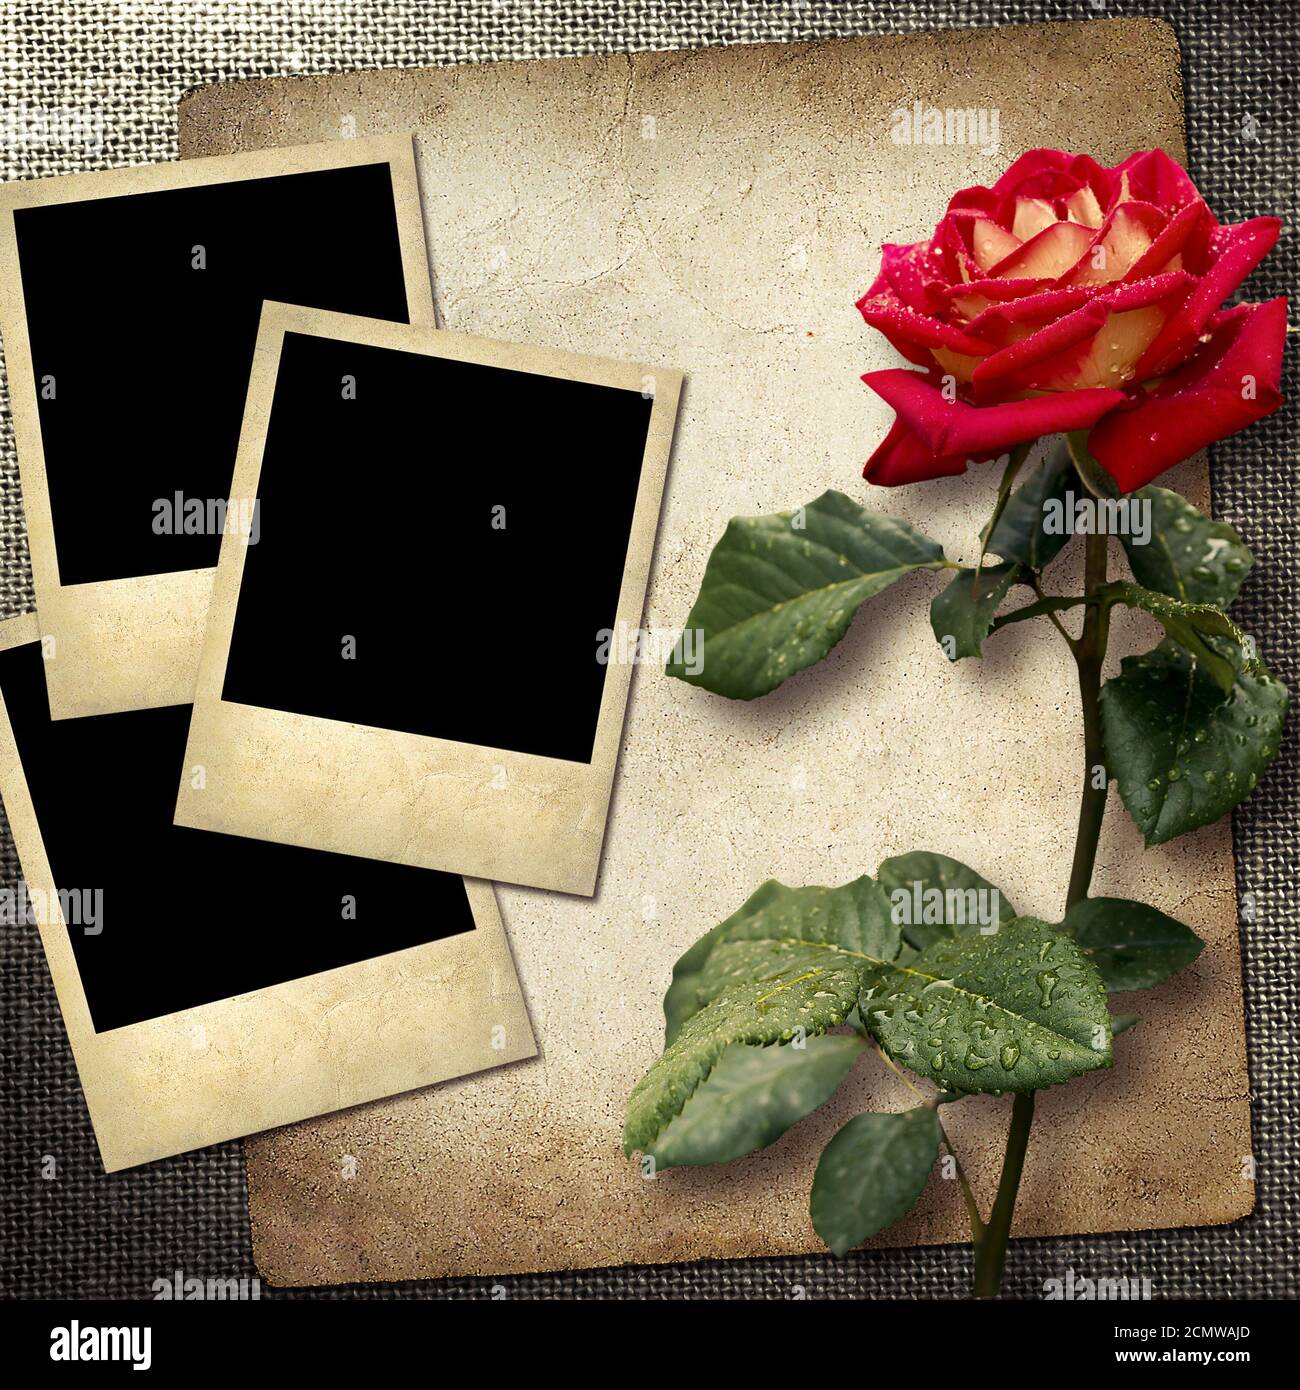 Grunge Background With Vintage Album With Roses Stock Photo, Picture and  Royalty Free Image. Image 132194742.